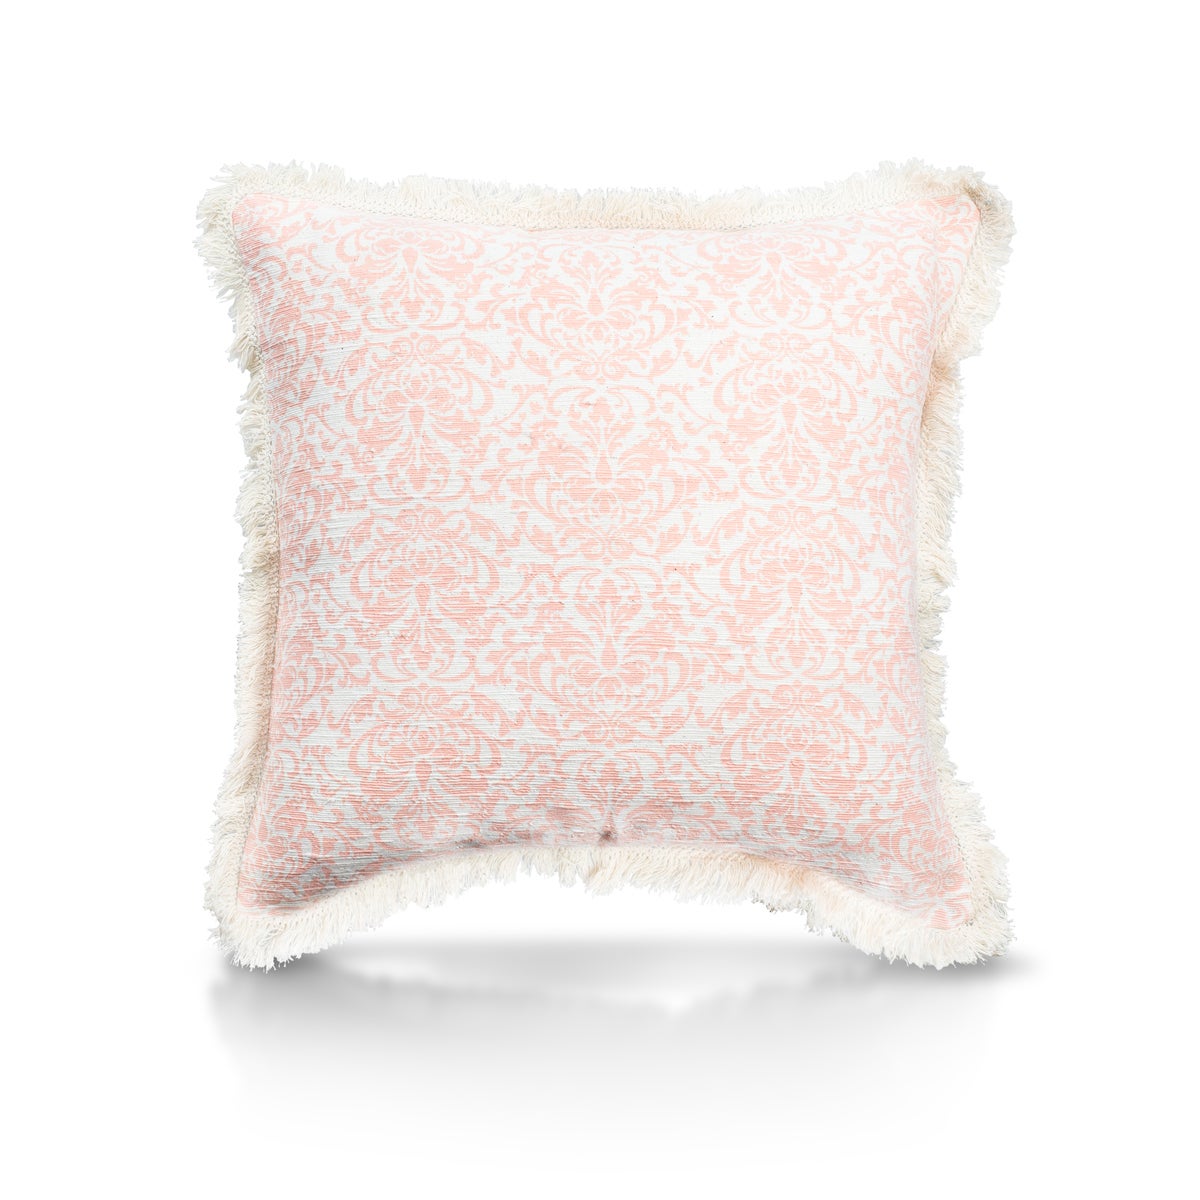 Pillow, 20" with Fringe - Damask, Coral